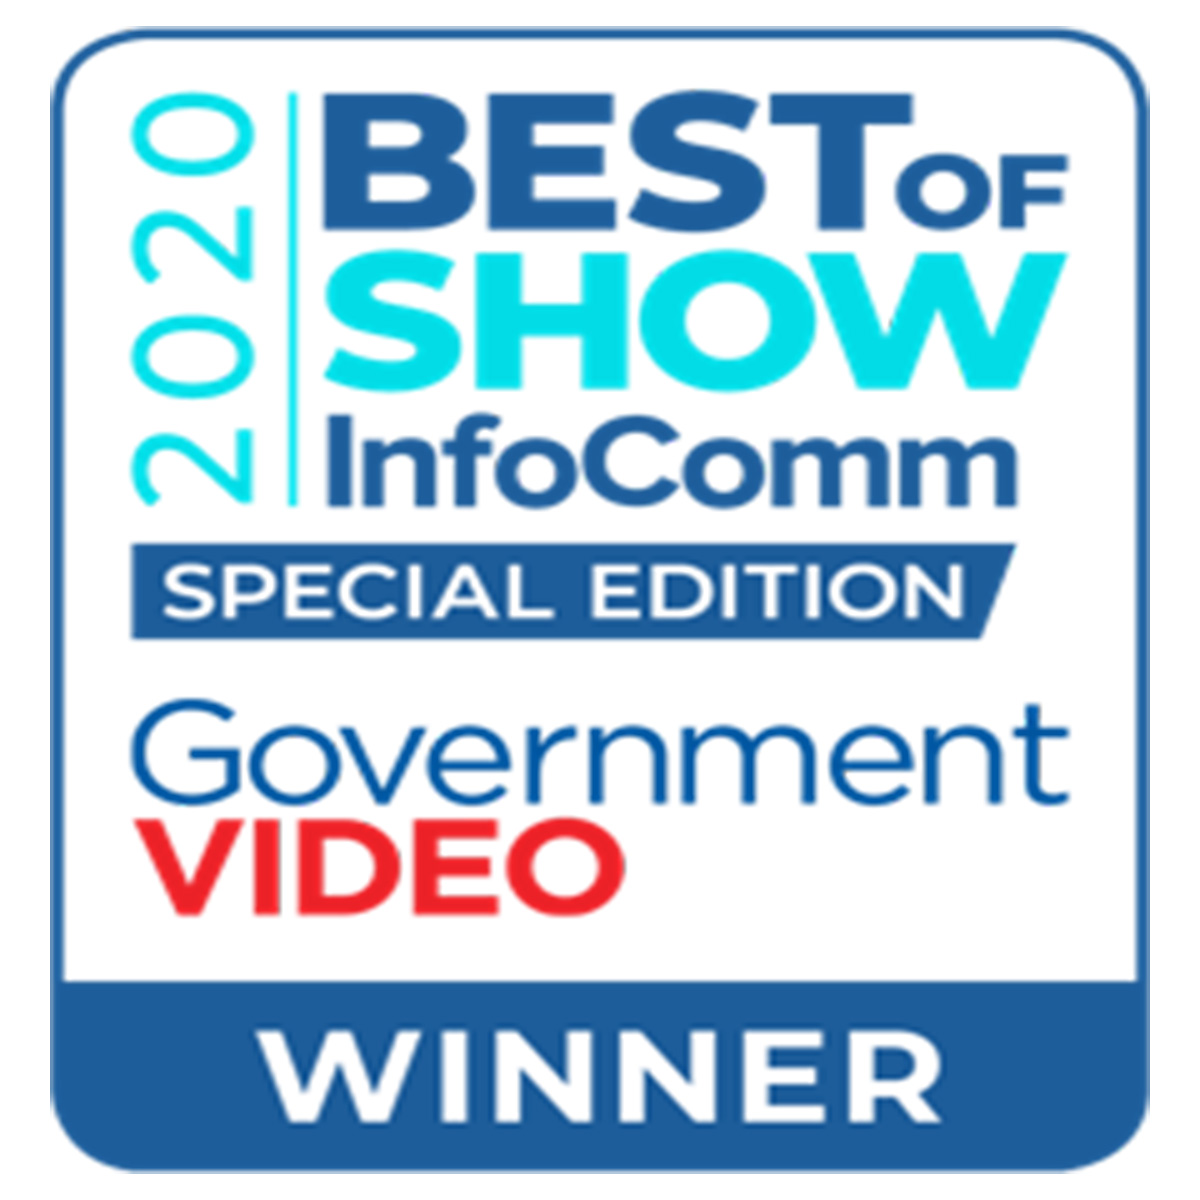 Government Video "Best of Show"